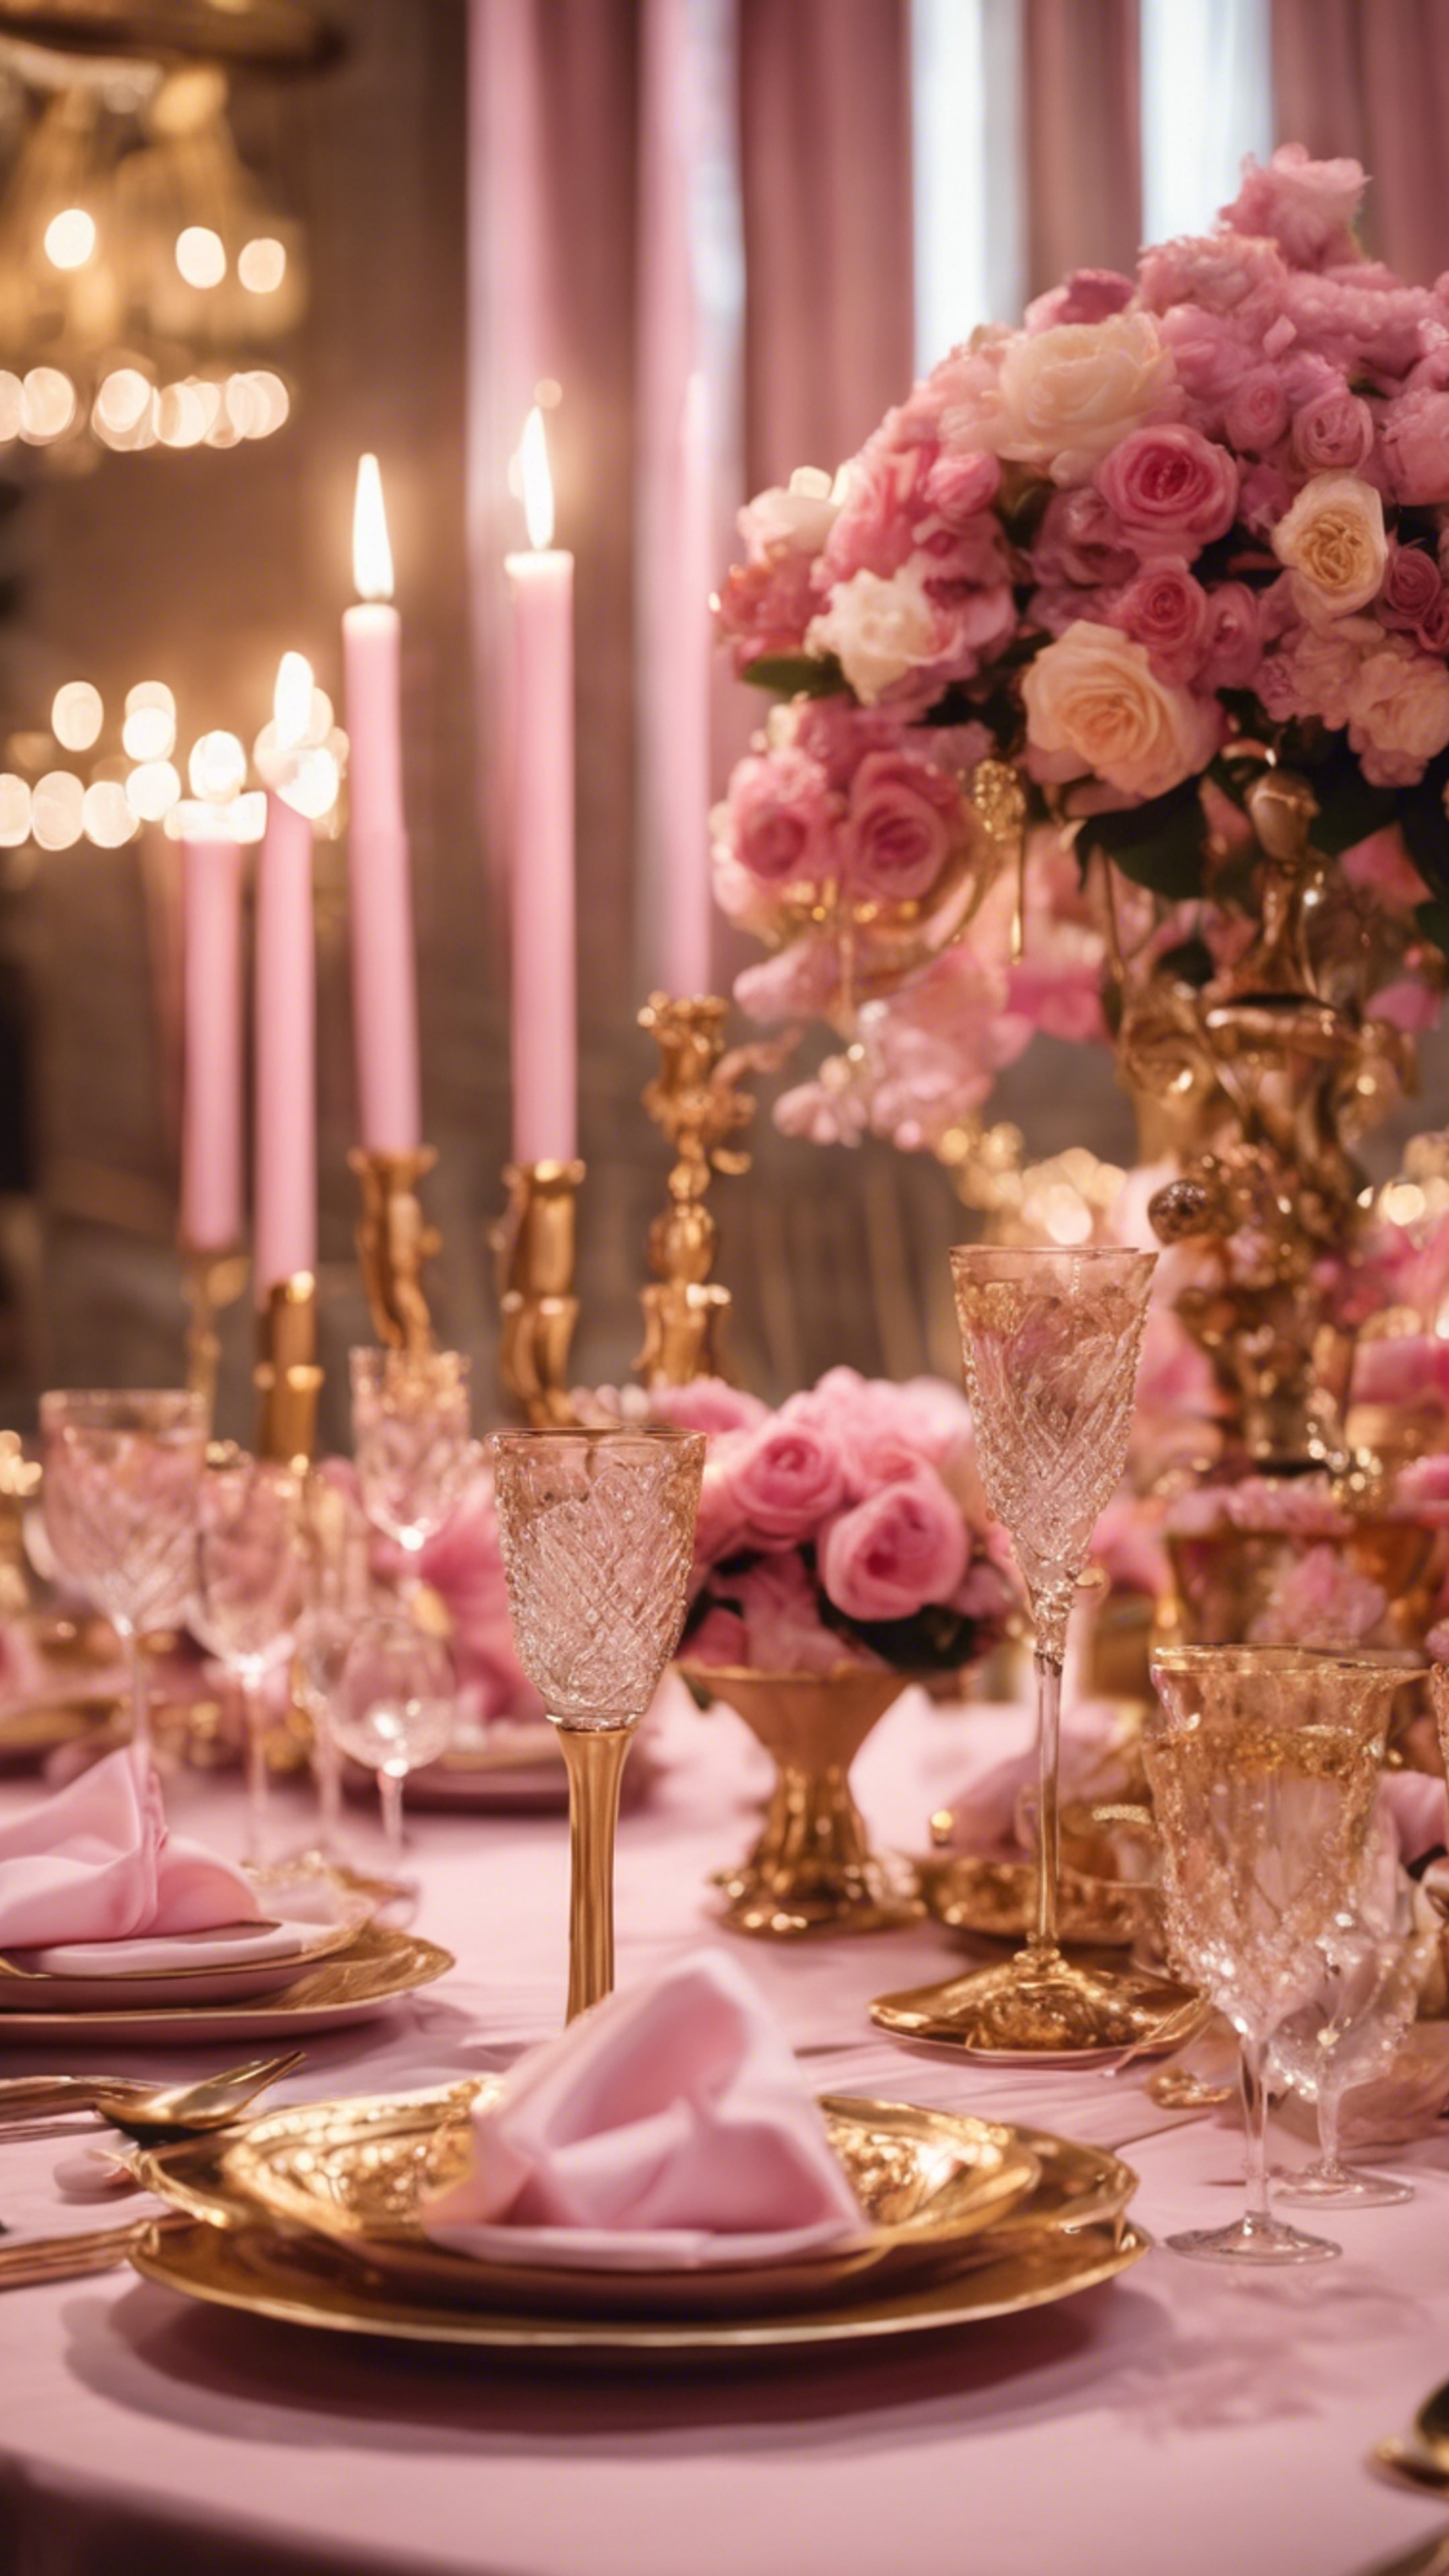 An elegant pink and gold-themed dining table set for an evening soiree. Tapet[a96f4c3be44f41948a30]